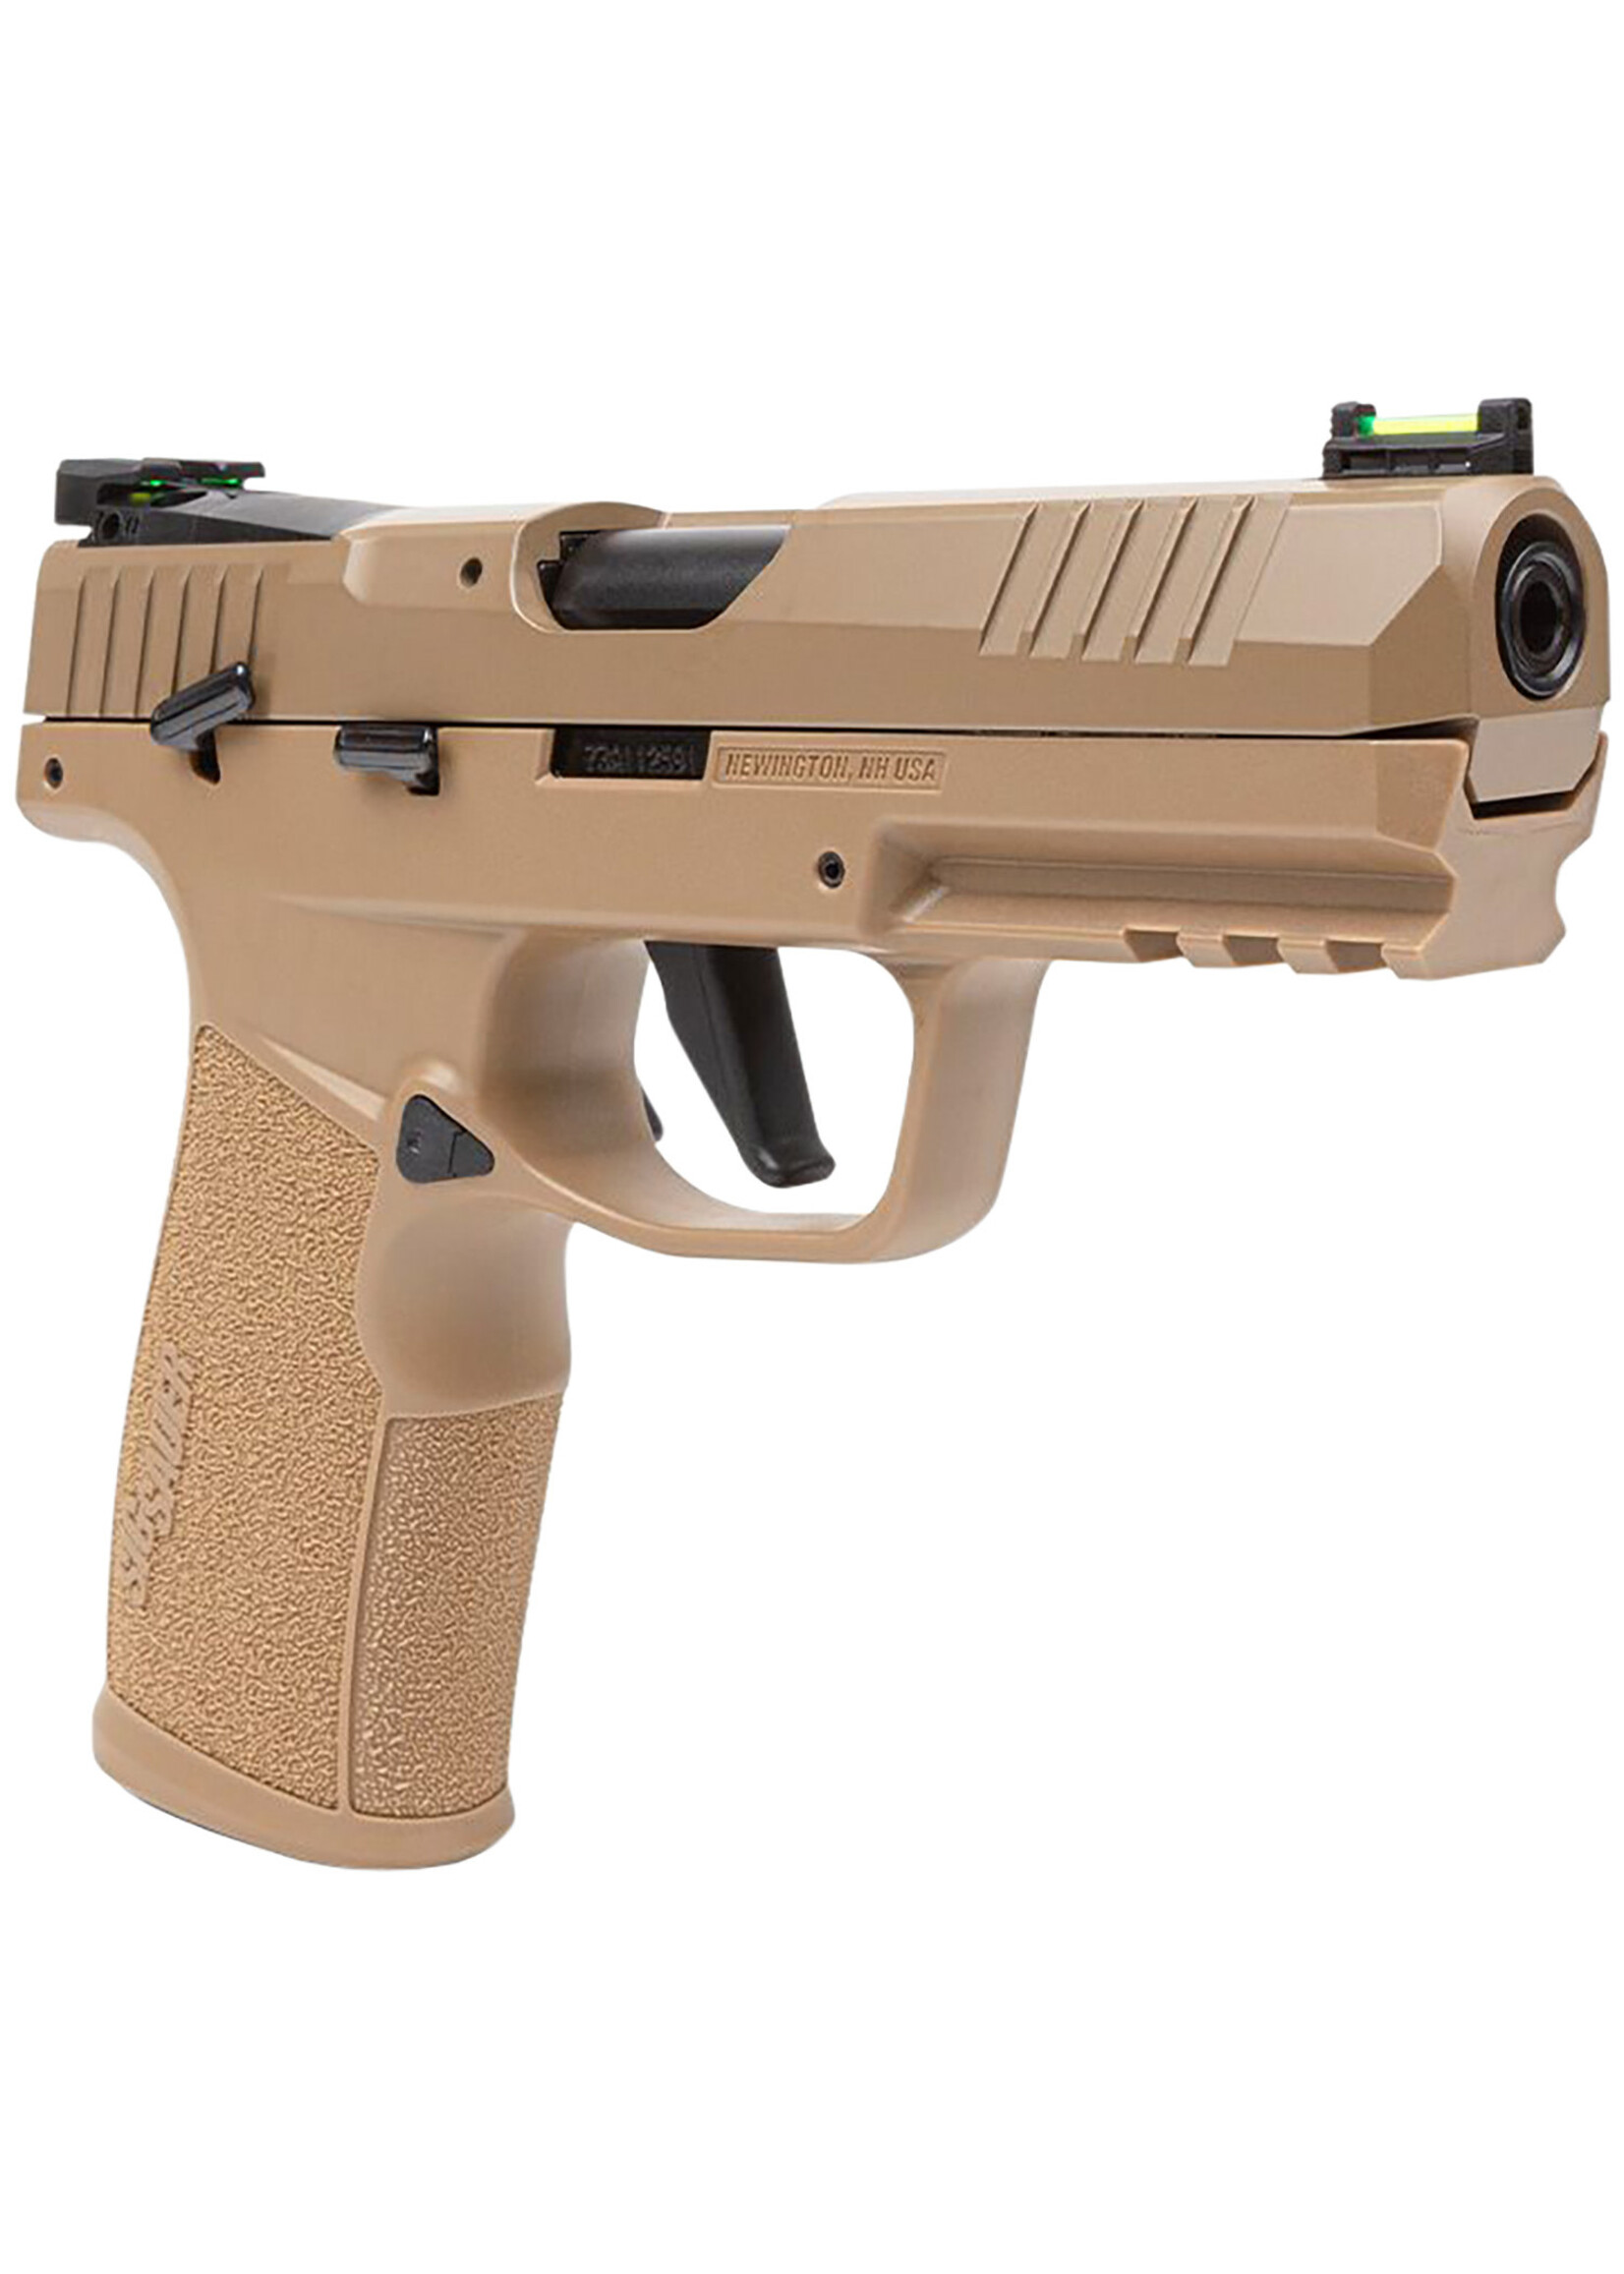 Sig Sauer SPECIAL ORDER Sig Sauer 322CCOYTACPAC P322 Full Size 22 LR 20+1 4" Black Steel w/Threaded Barrel Adapter Barrel/ Coyote Cerakote Optic Ready/Serrated Slide/ Coyote Tan Steel Frame w/Picatinny Rail/ Coyote Polymer Grip Module Grips Ambidextrous